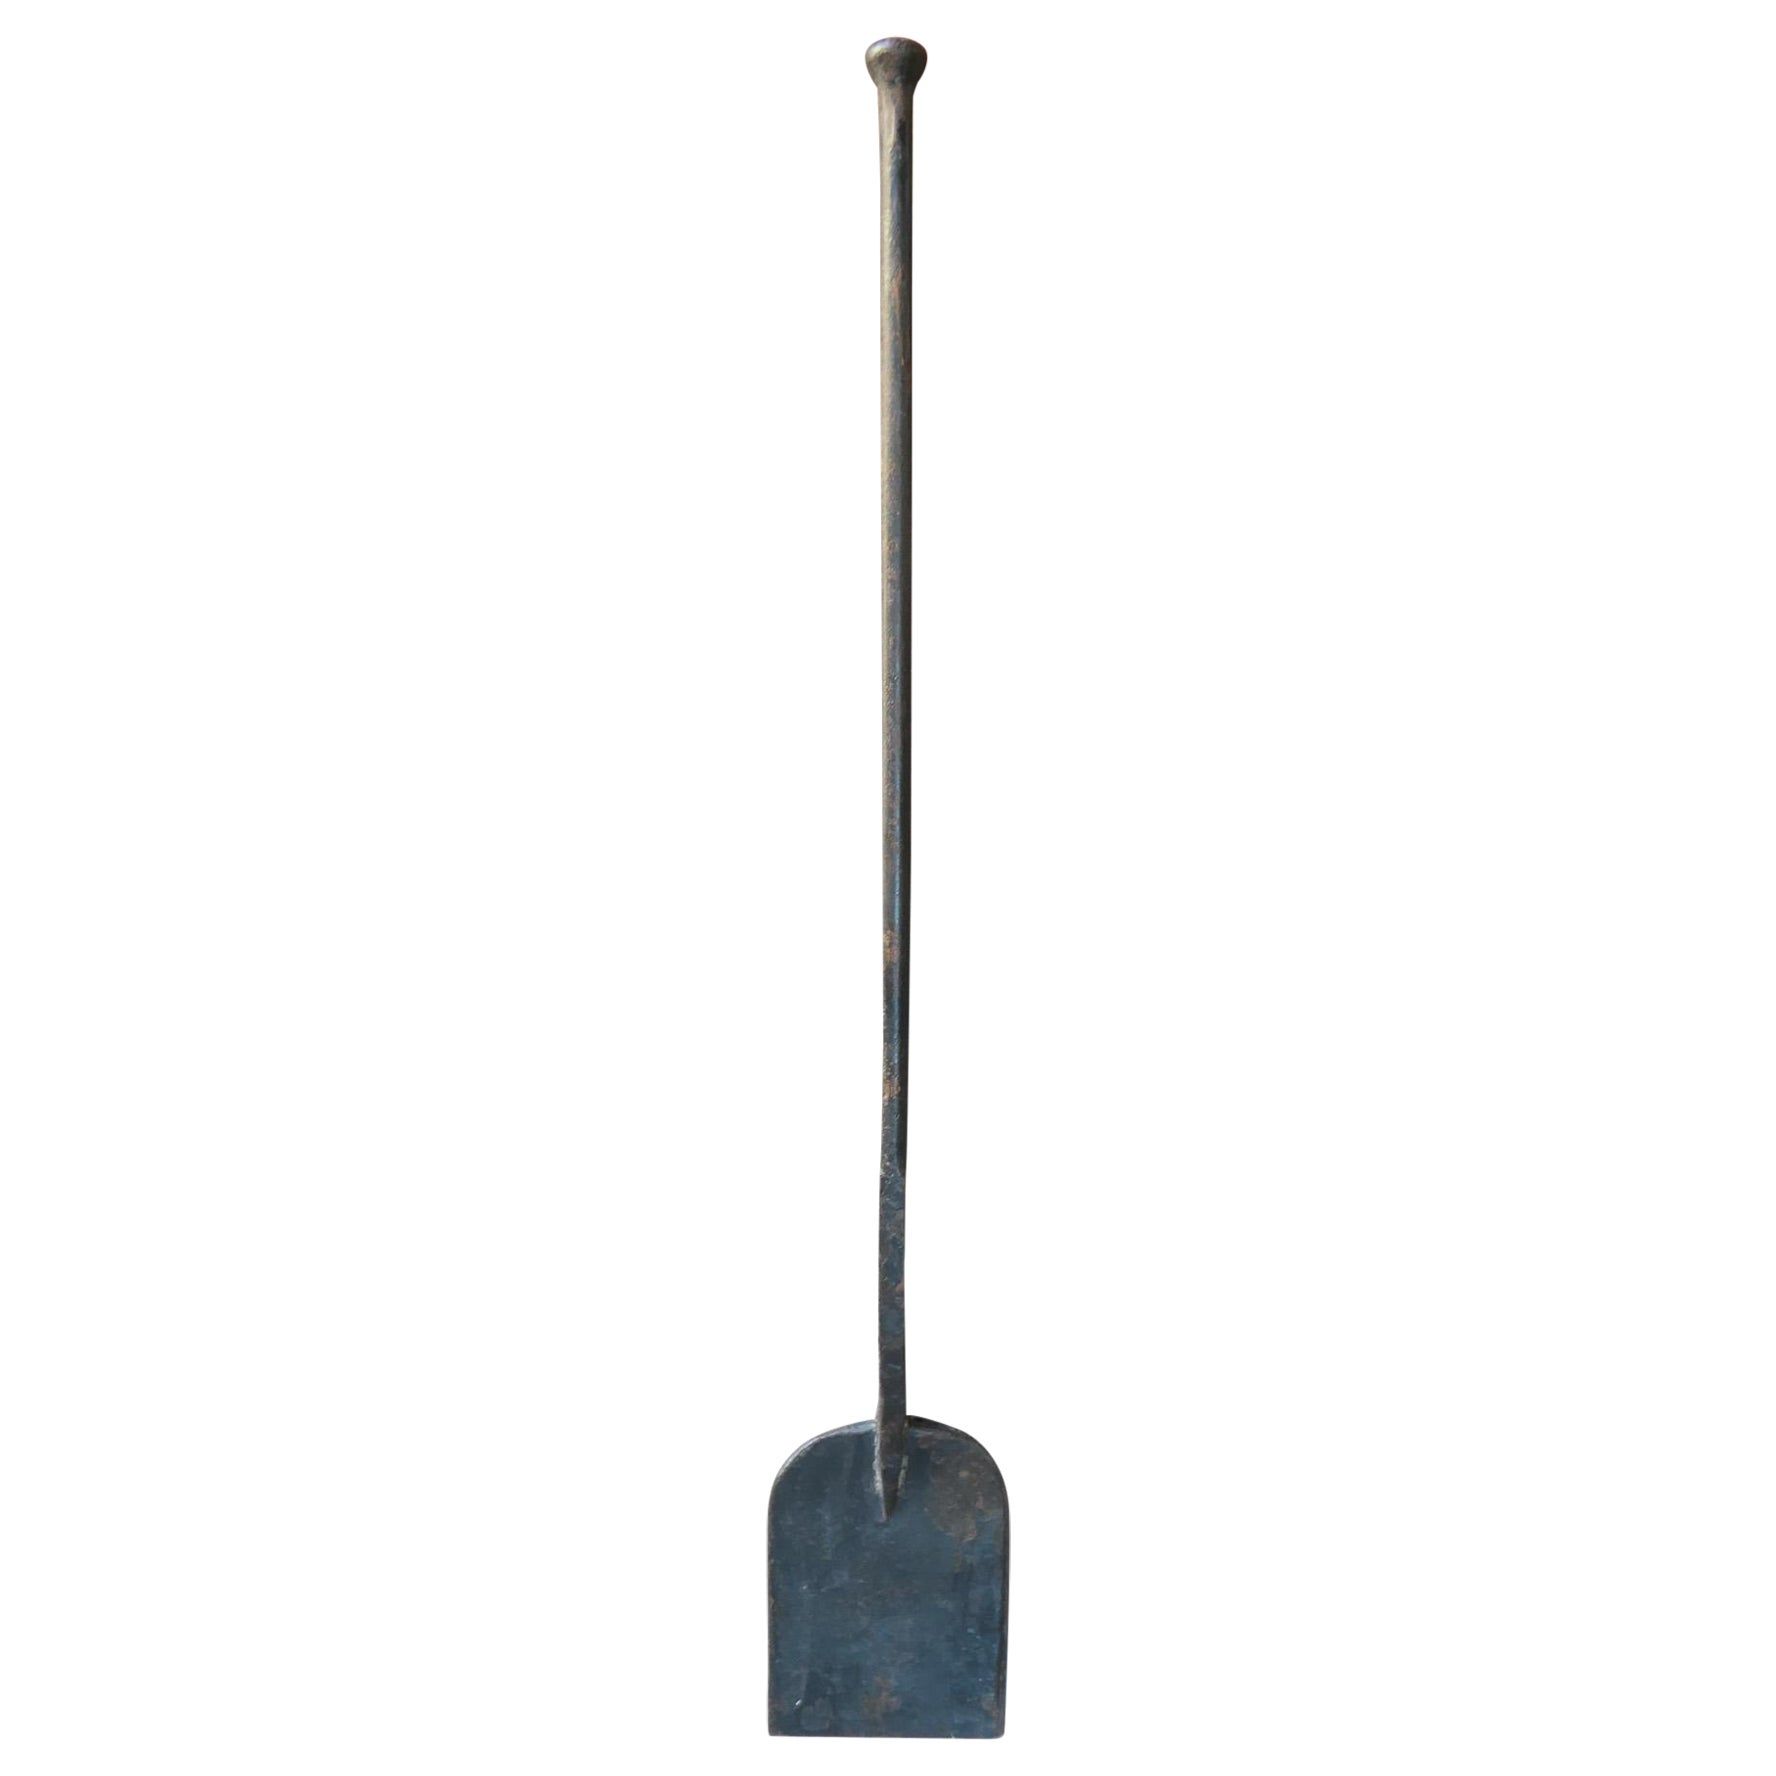 Rustic French Antique Fireplace Shovel, 18th Century